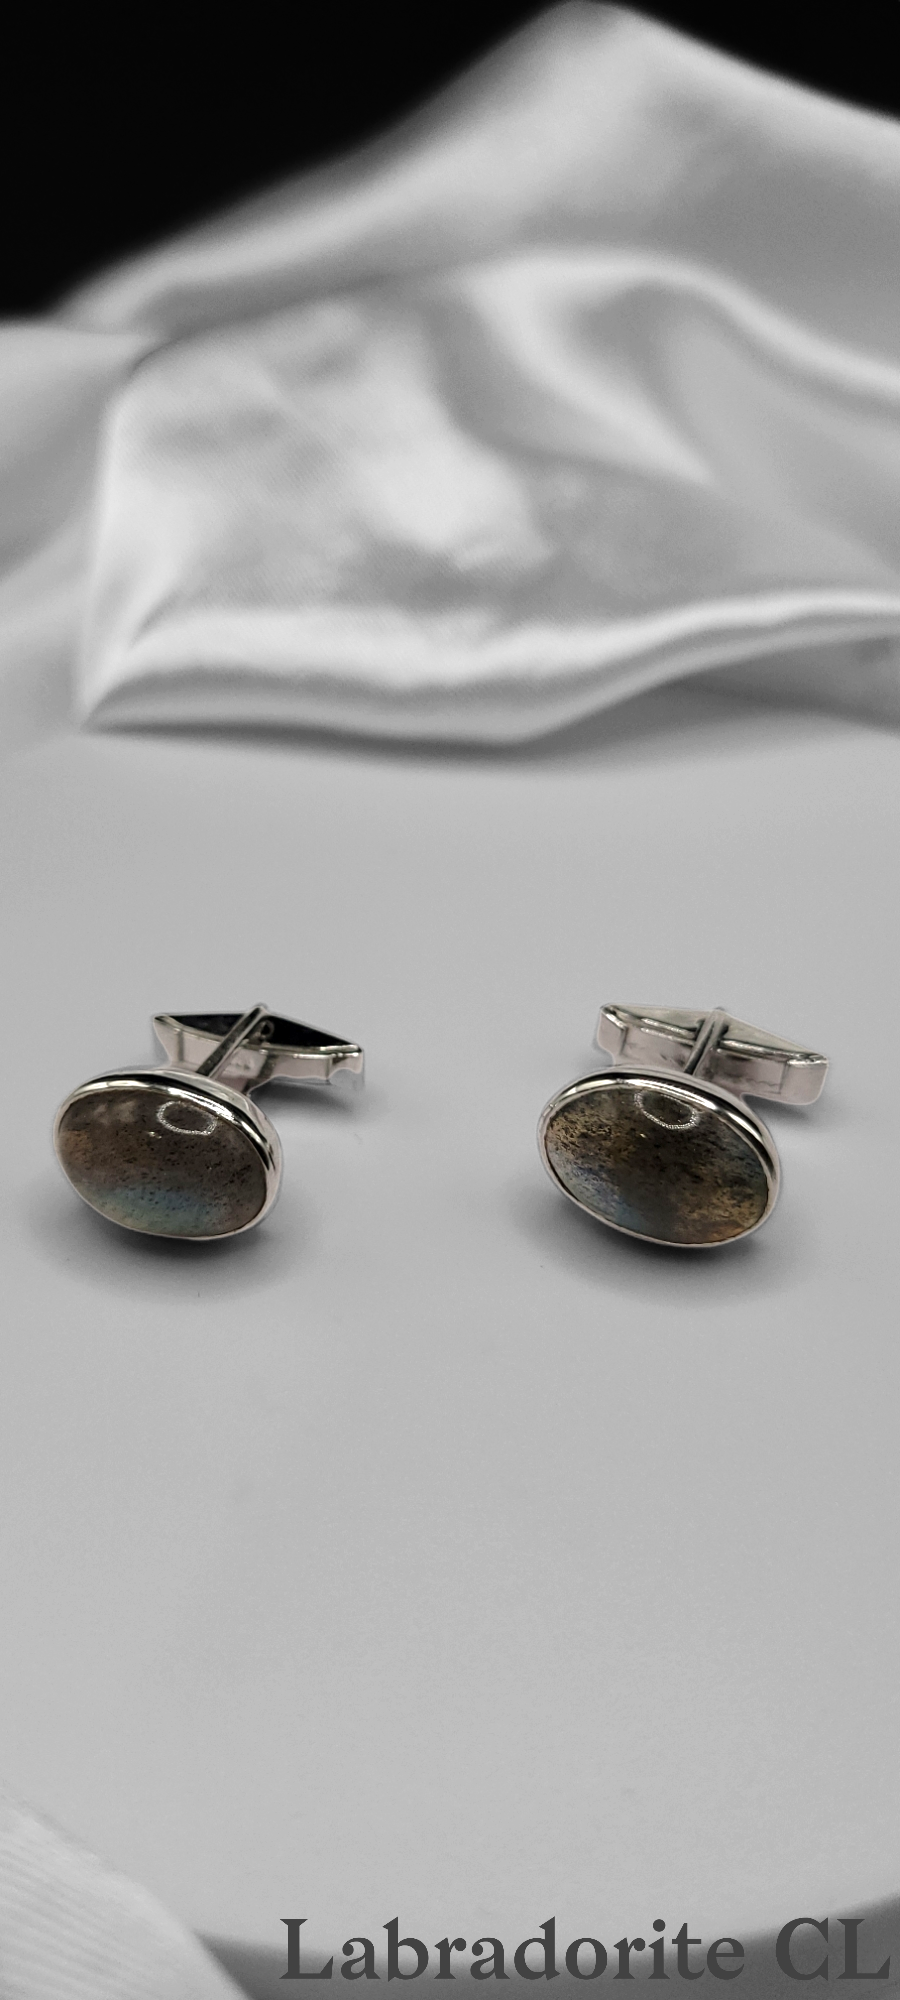 LABRADORITE STONE CUFF LINKS ON STERLING SILVER. KNOWN AS THE STONE OF TRANSFORMATION. A TRULY MAGICAL PIECE!